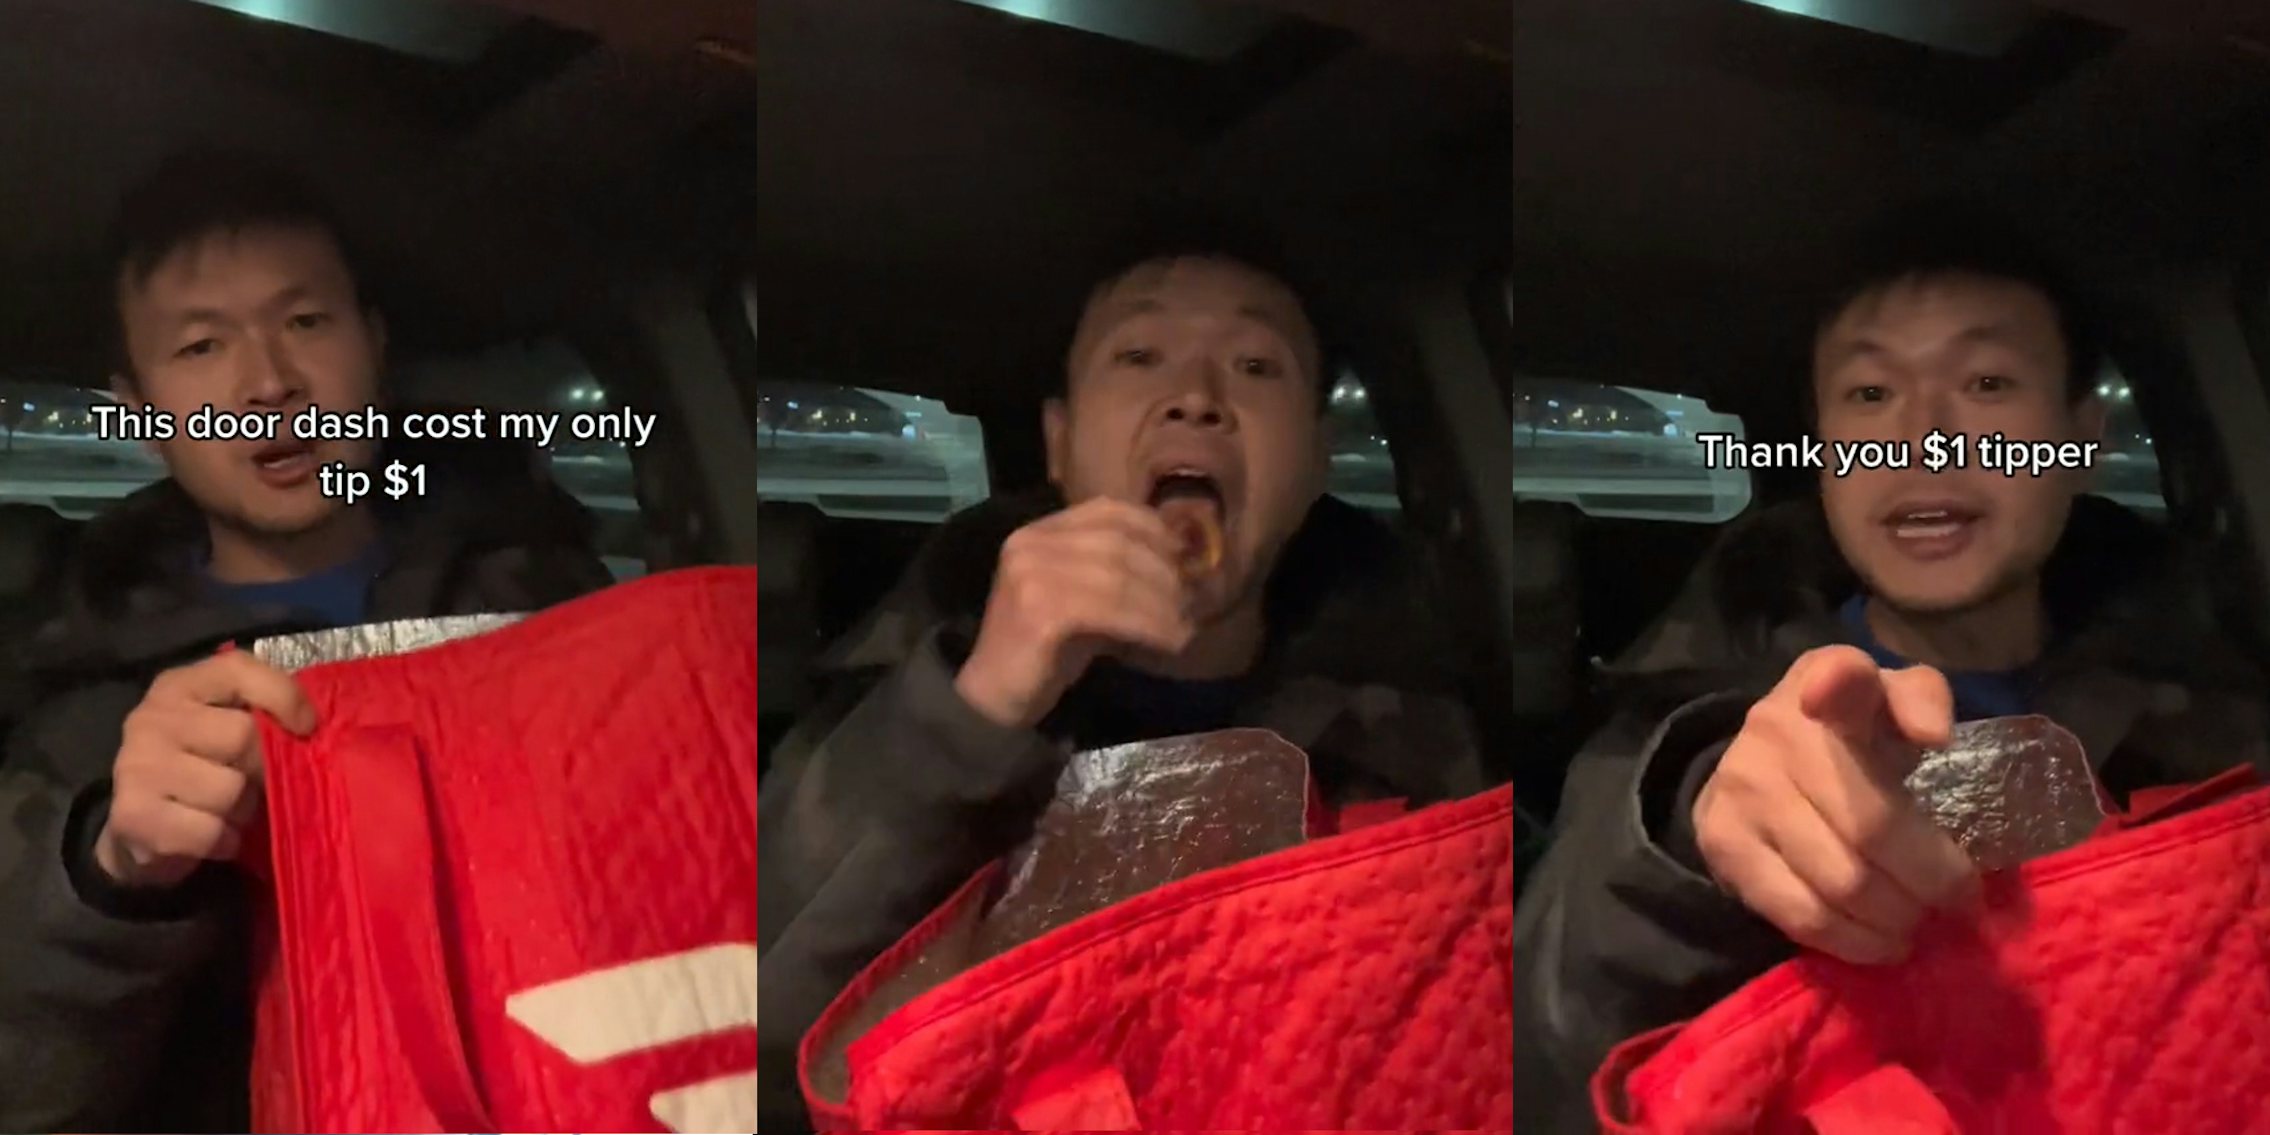 DoorDash driver in car with branded bag caption 'This door dash cost my only tip $1' (l) DoorDash driver in car with branded bag eating Arby's (c) DoorDash driver in car with branded bag pointing finger caption 'Thank you $1 tipper' (r)